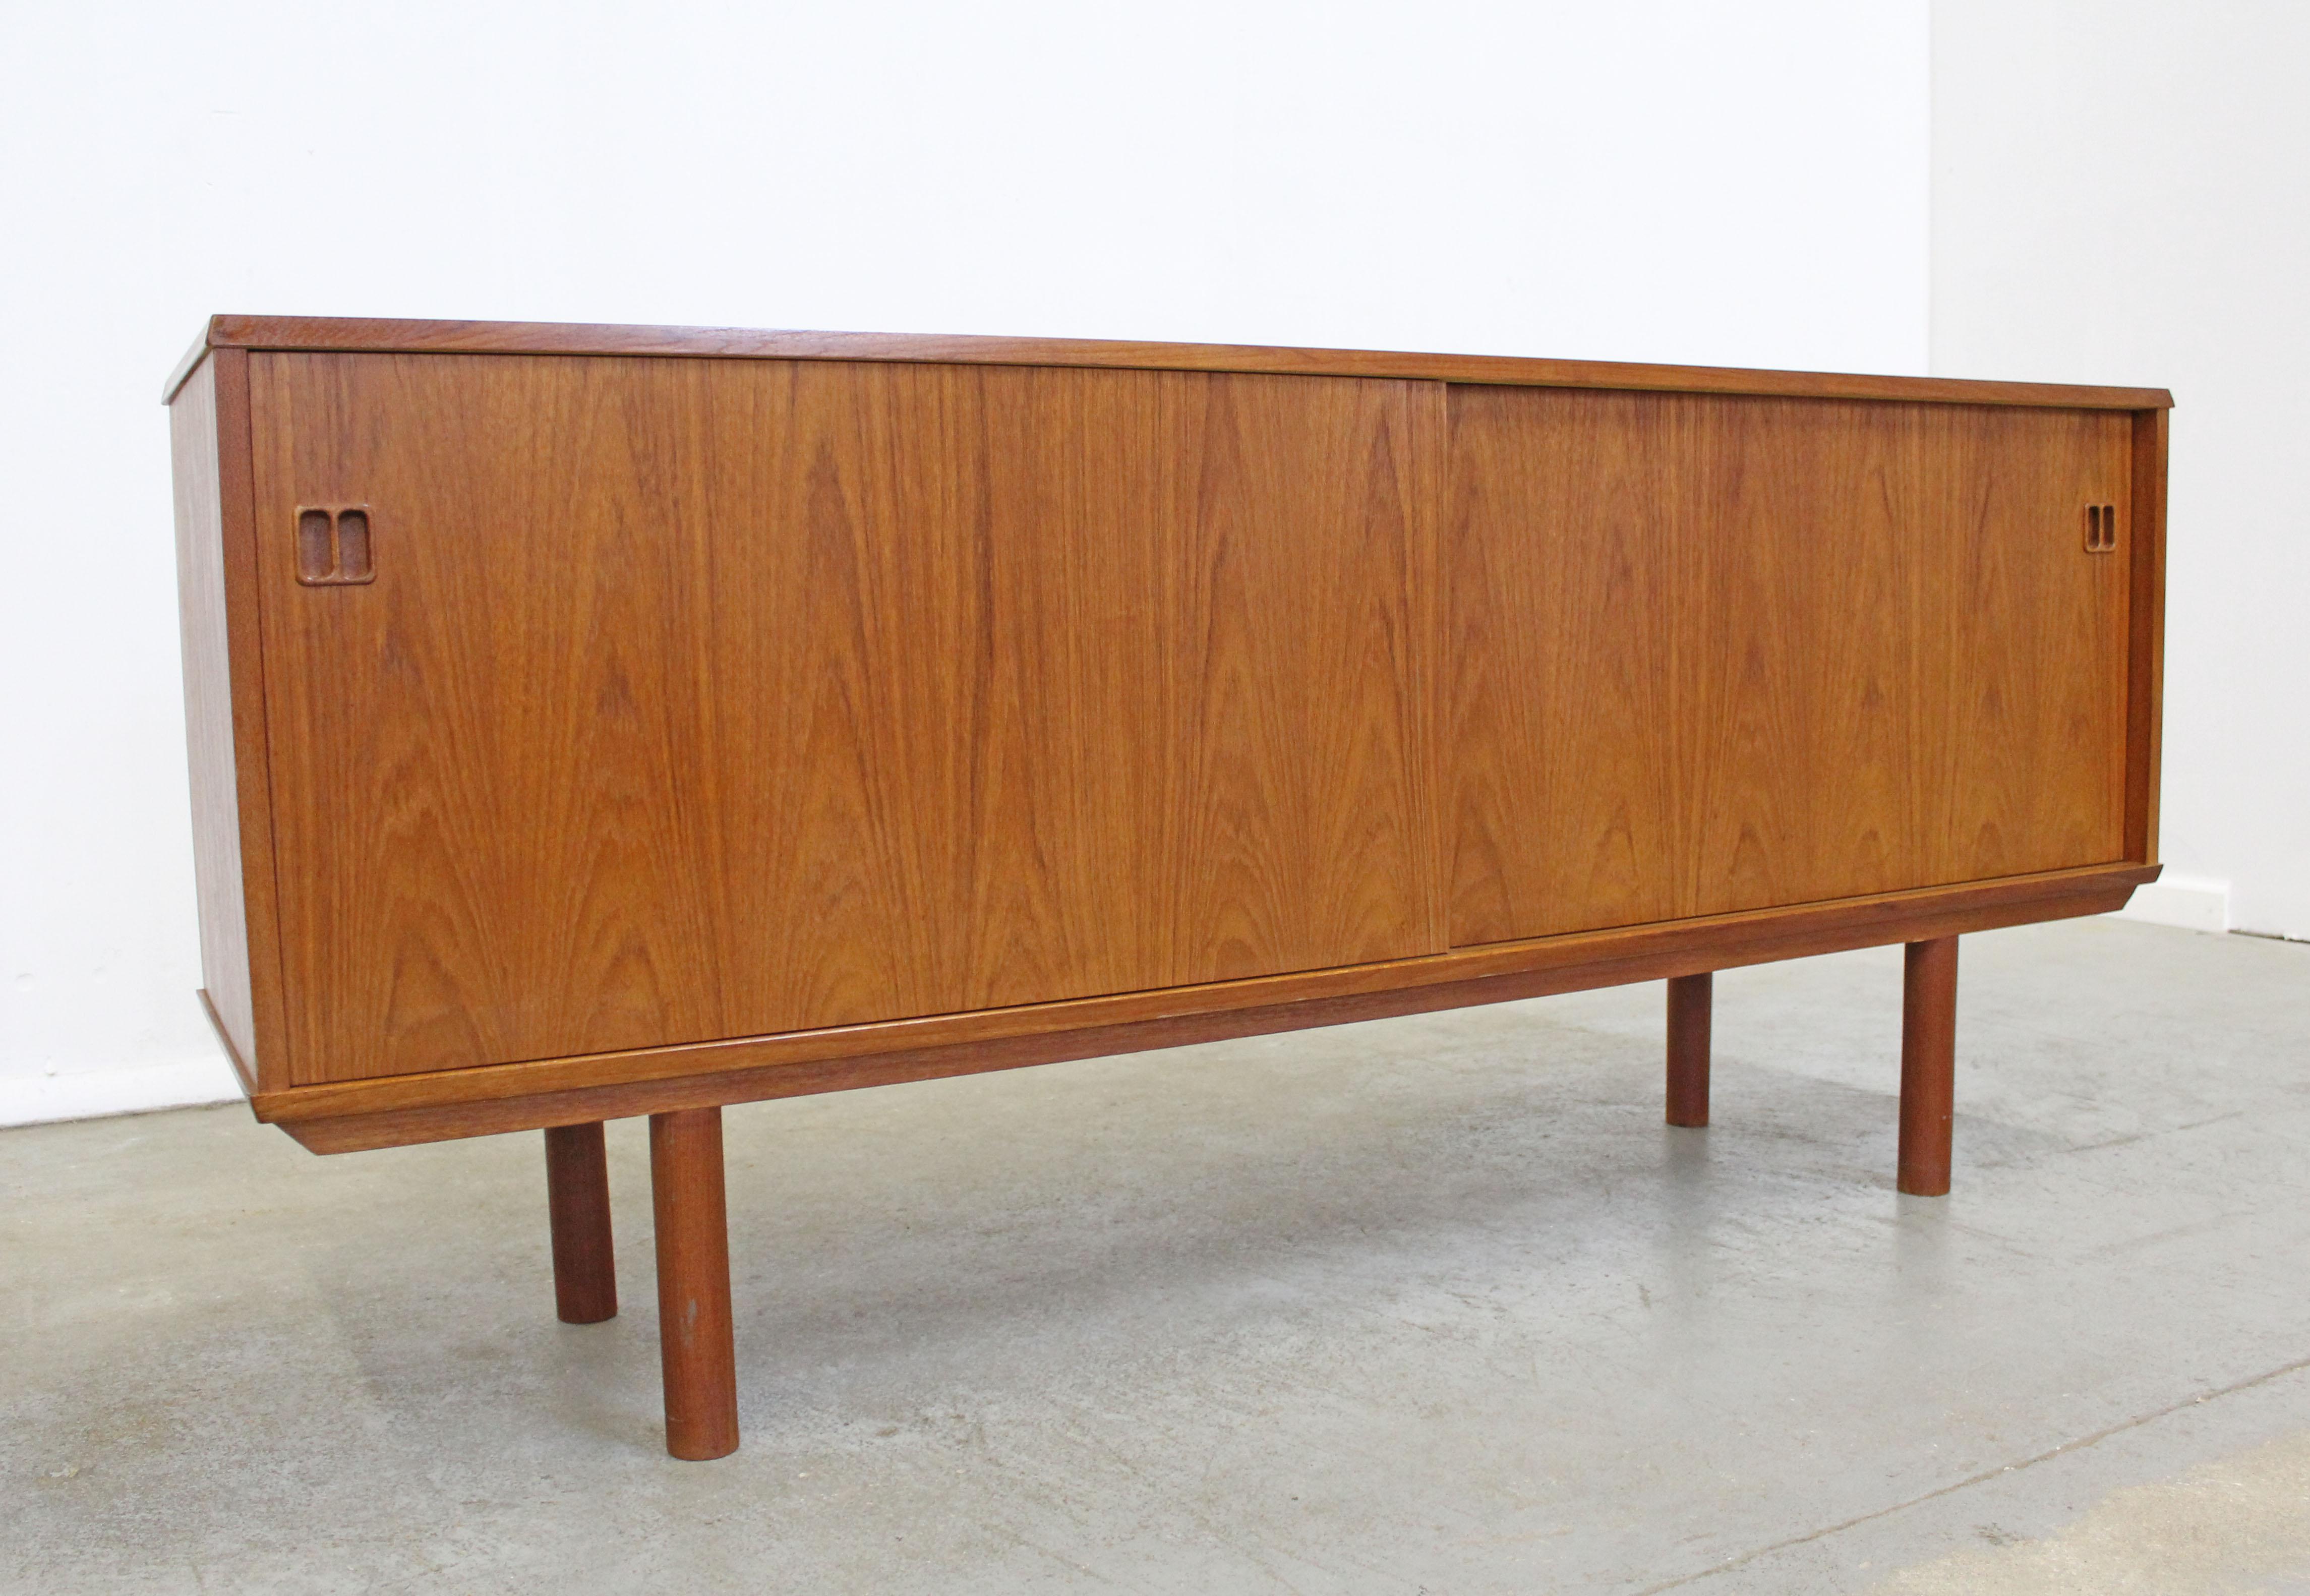 Offered is a Danish modern teak credenza, featuring sliding doors with inner adjustable shelving and 3 drawers on one side. It is in good vintage condition showing some wear (sun fade or discoloration on top, surface scratches, age wear--see